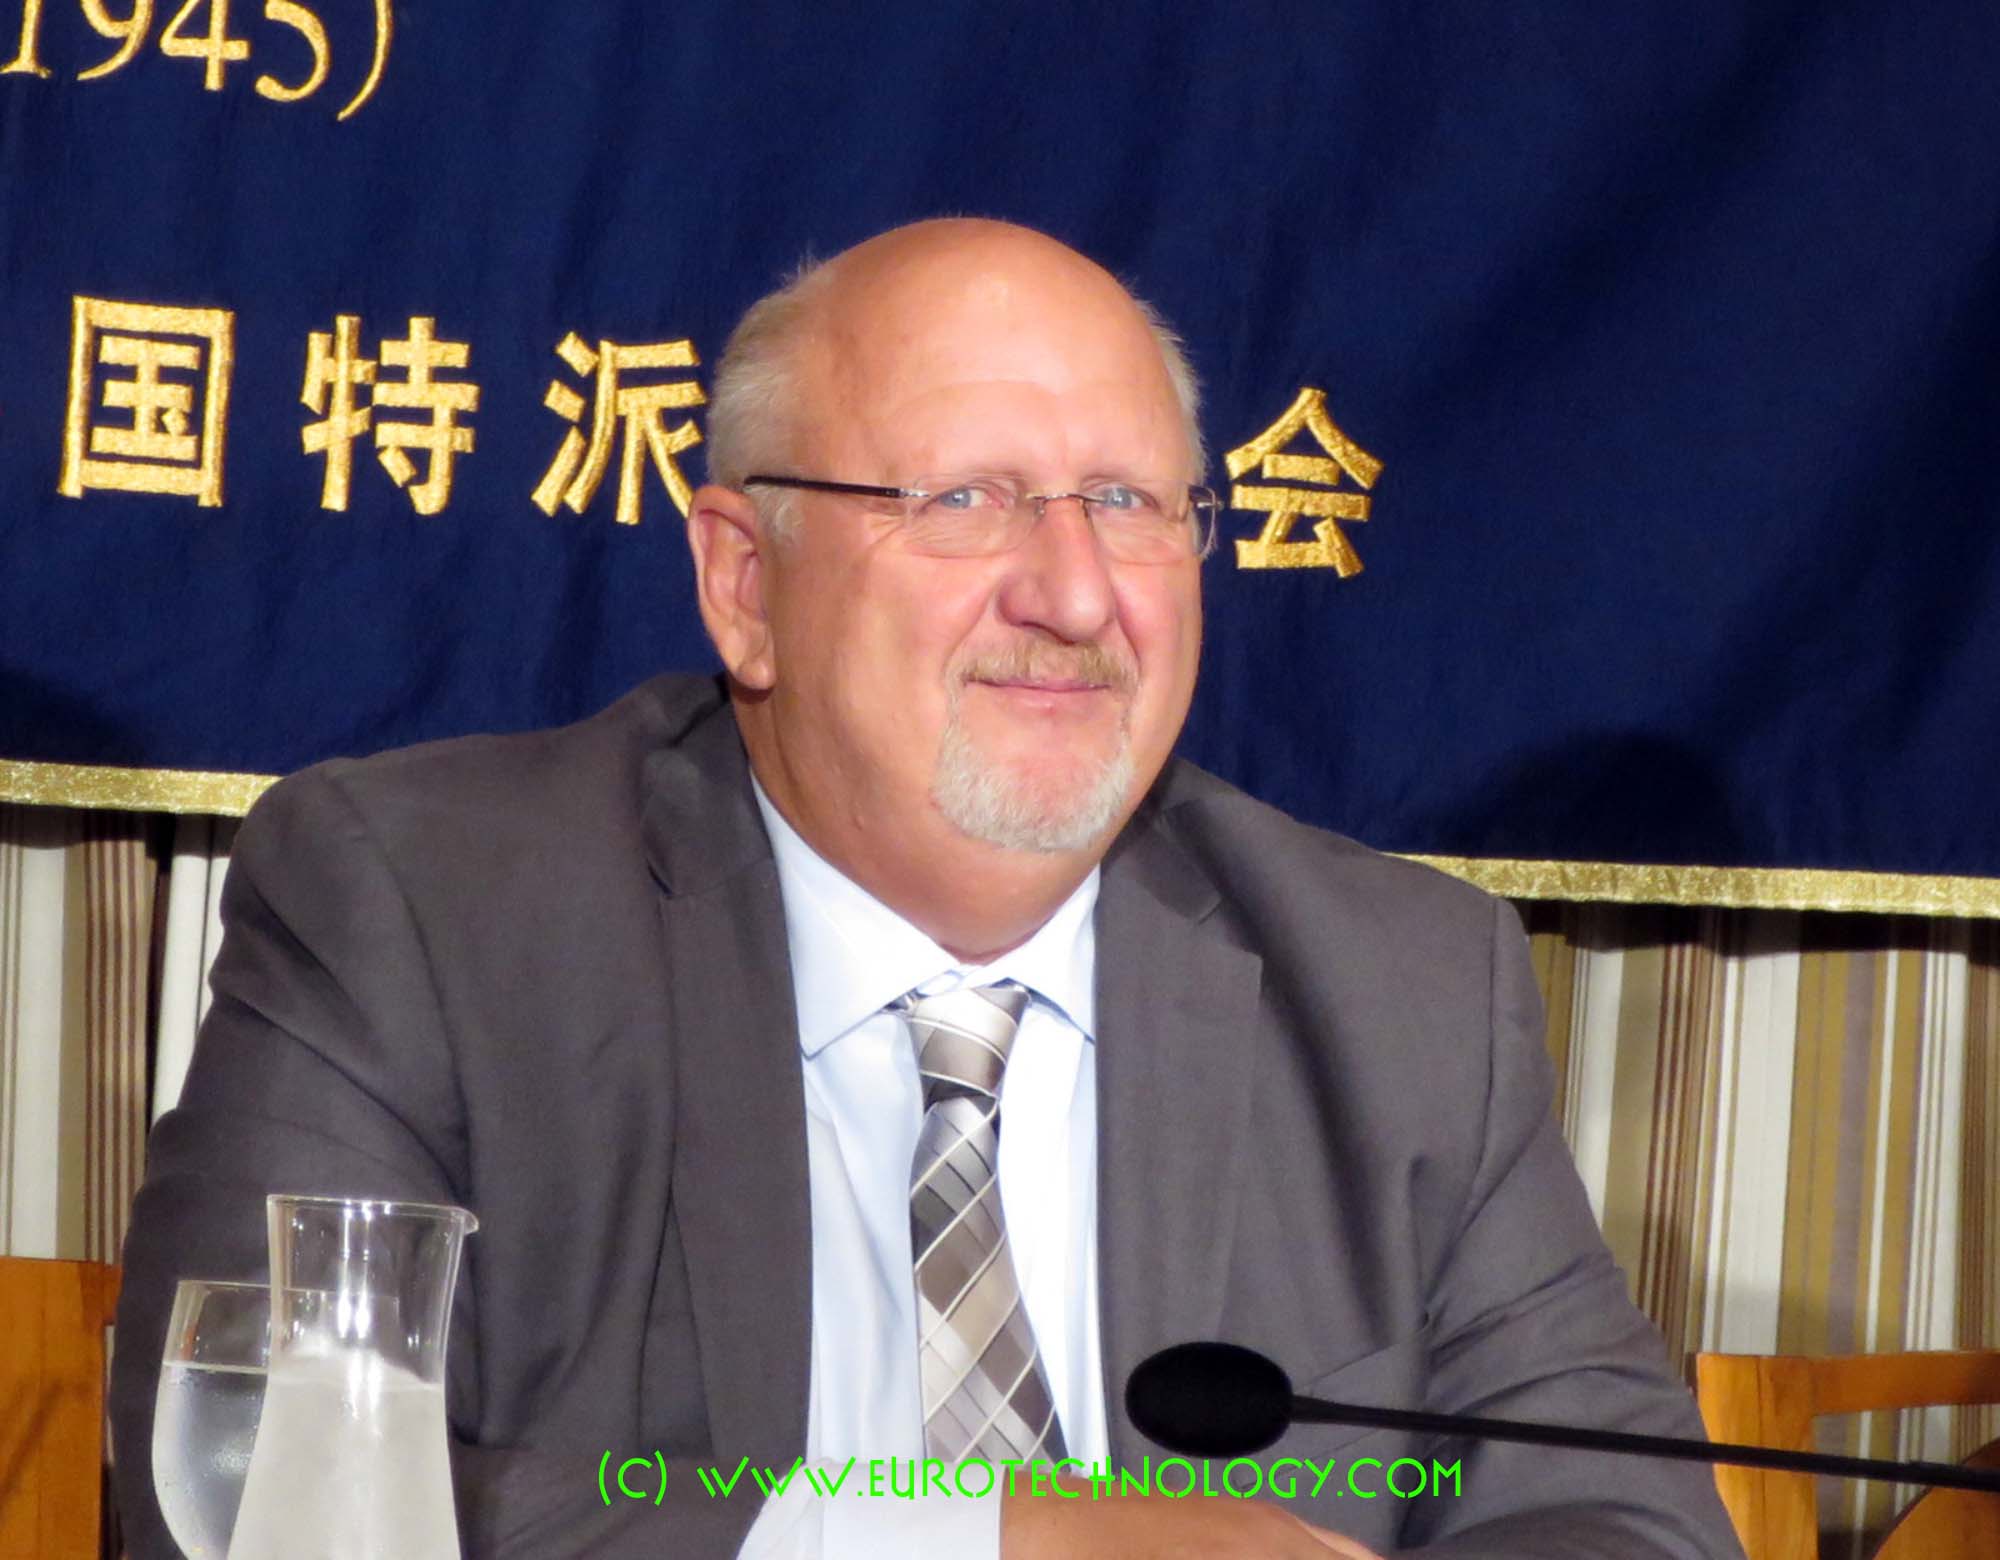 Japan nuclear safety – Dr. Charles “Chuck” Casto’s view and lessons learnt Dr Charles Casto: the Fukushima disaster changed my life. We cannot let this happen again anywhere in the world.